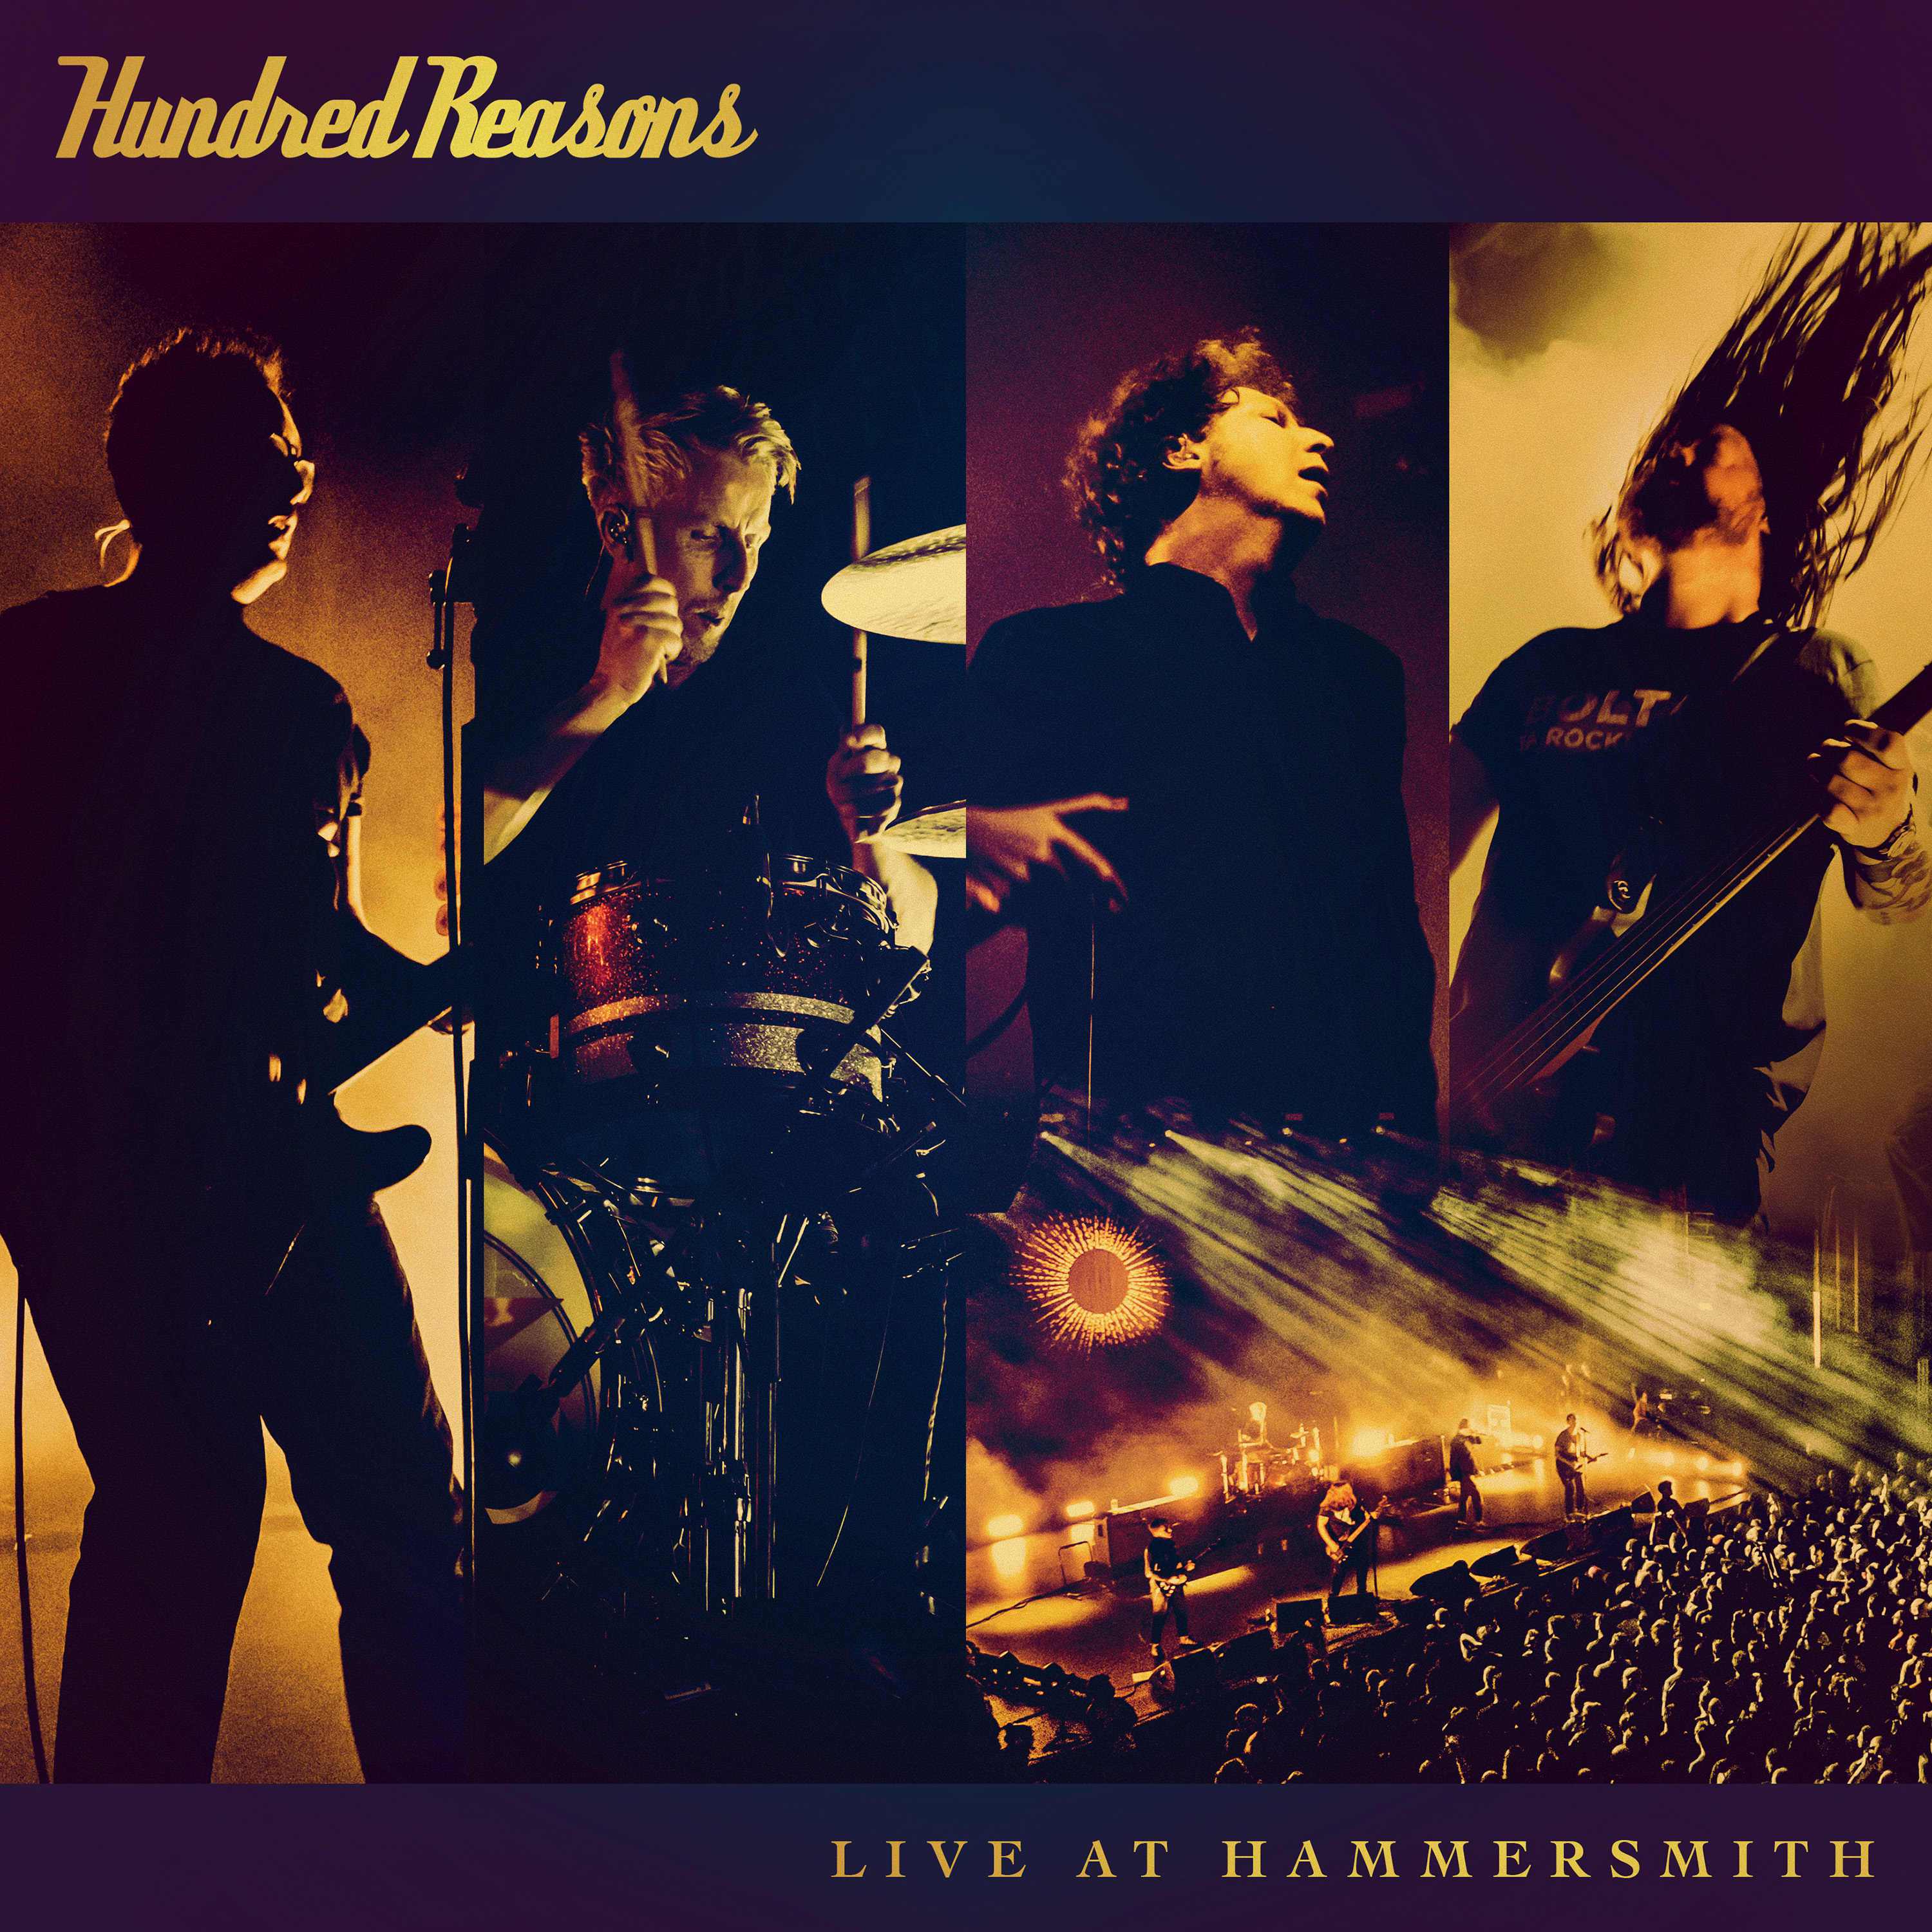 Hundred Reasons - If I Could (Live at Hammersmith)